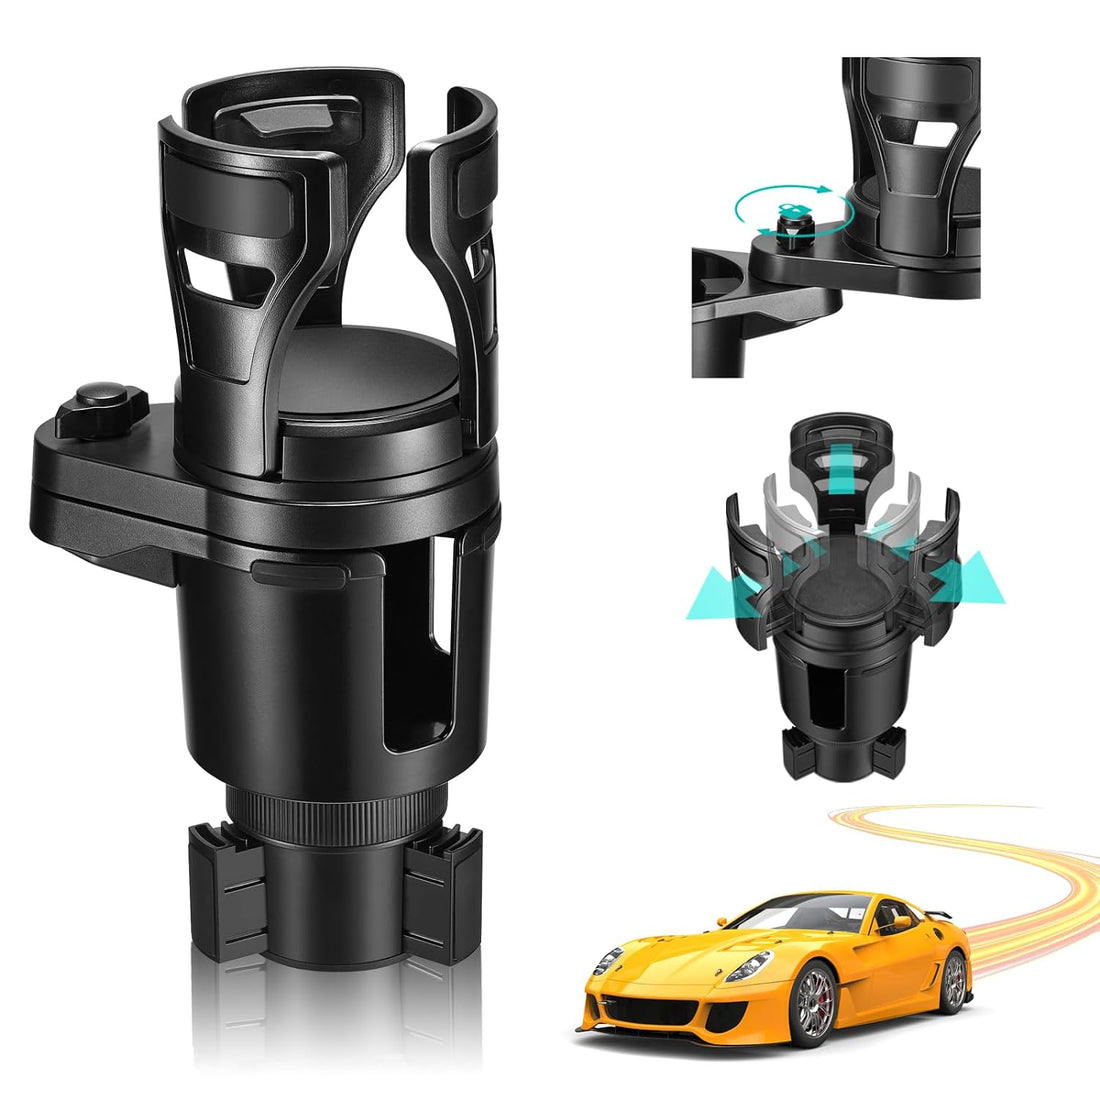 THIS HILL Cup Holder Expander for Car, Upgrade 2 in 1 Car Cup Holder Extender with 360° Rotating & Locking Function,All Purpose Car Cup with Adjustable Base, Suitable for Large Water Cups and Drinks